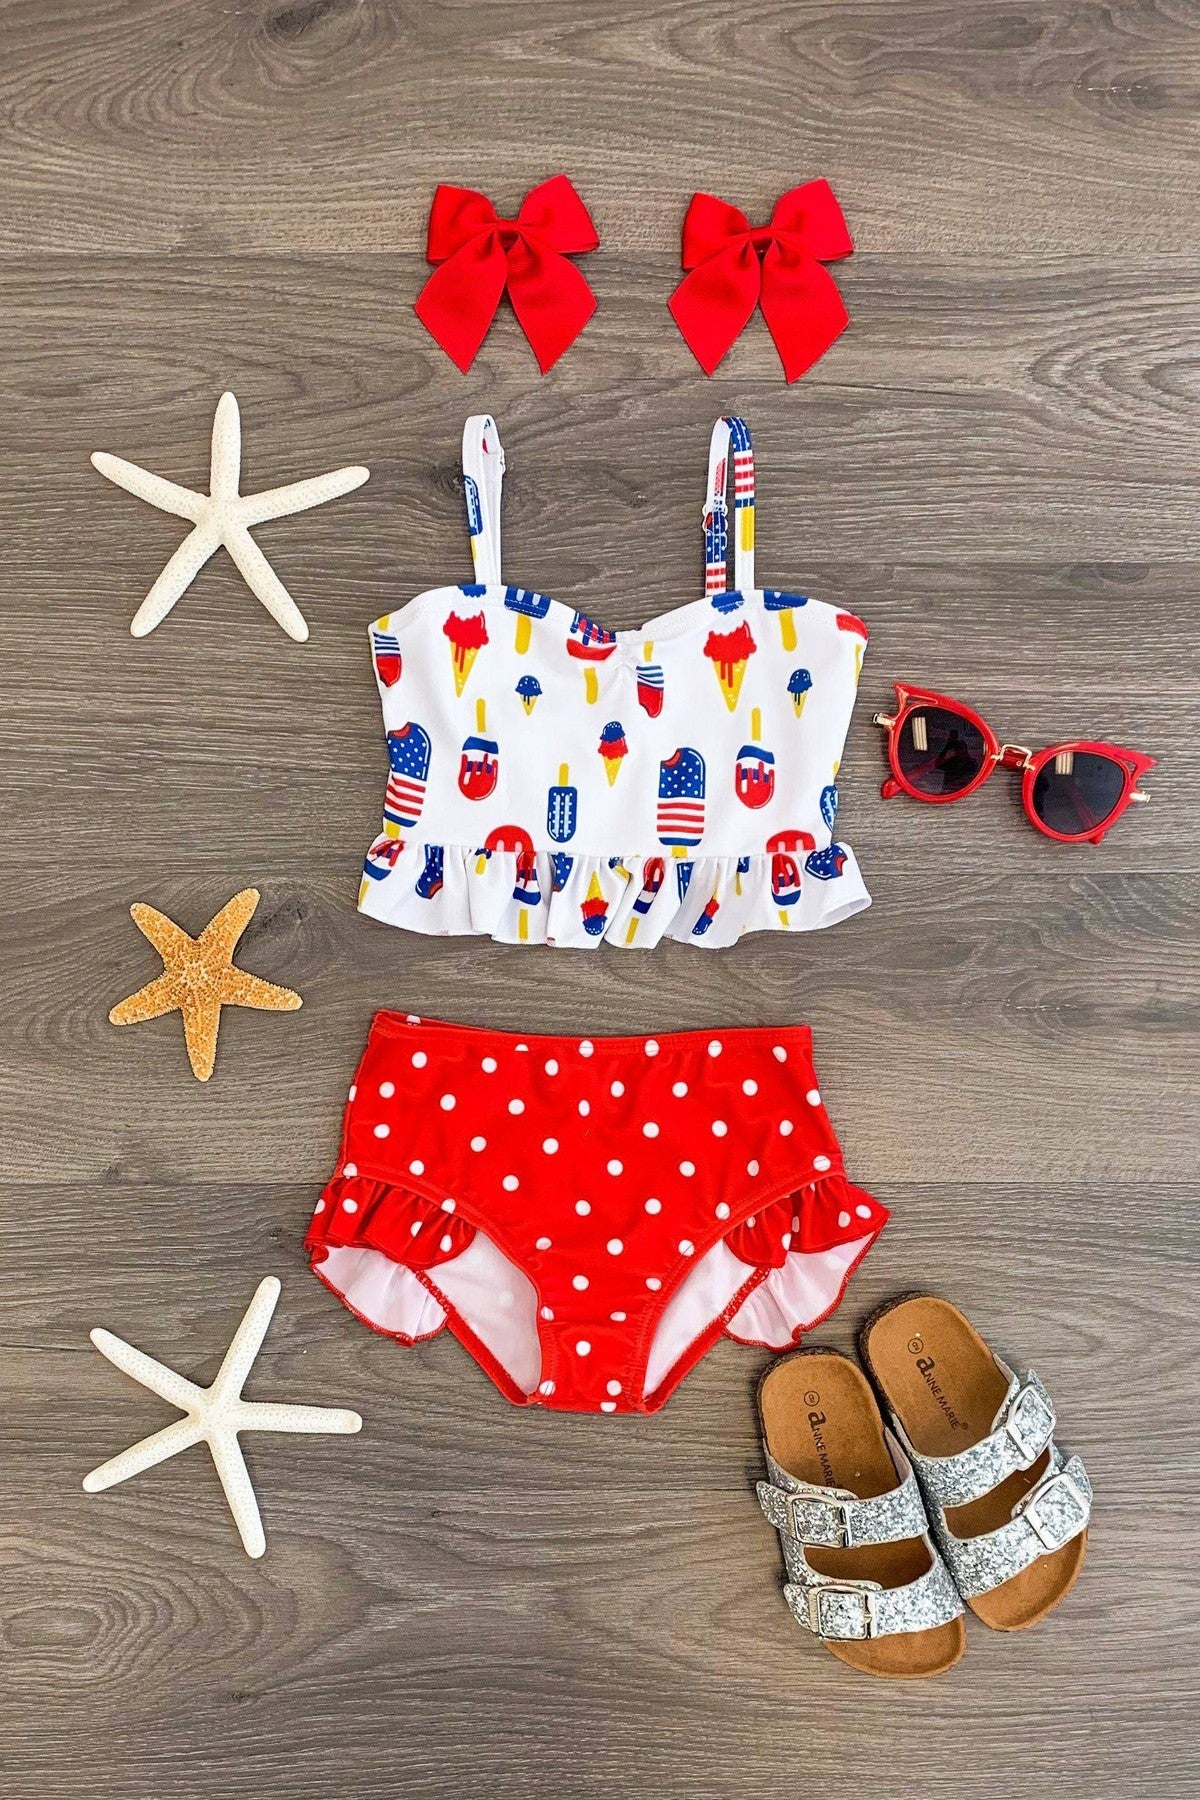 Girls Swim Suit Set | 2 Piece | Oopsie Daisy | Baby & Kids Clothing |  Boutiques